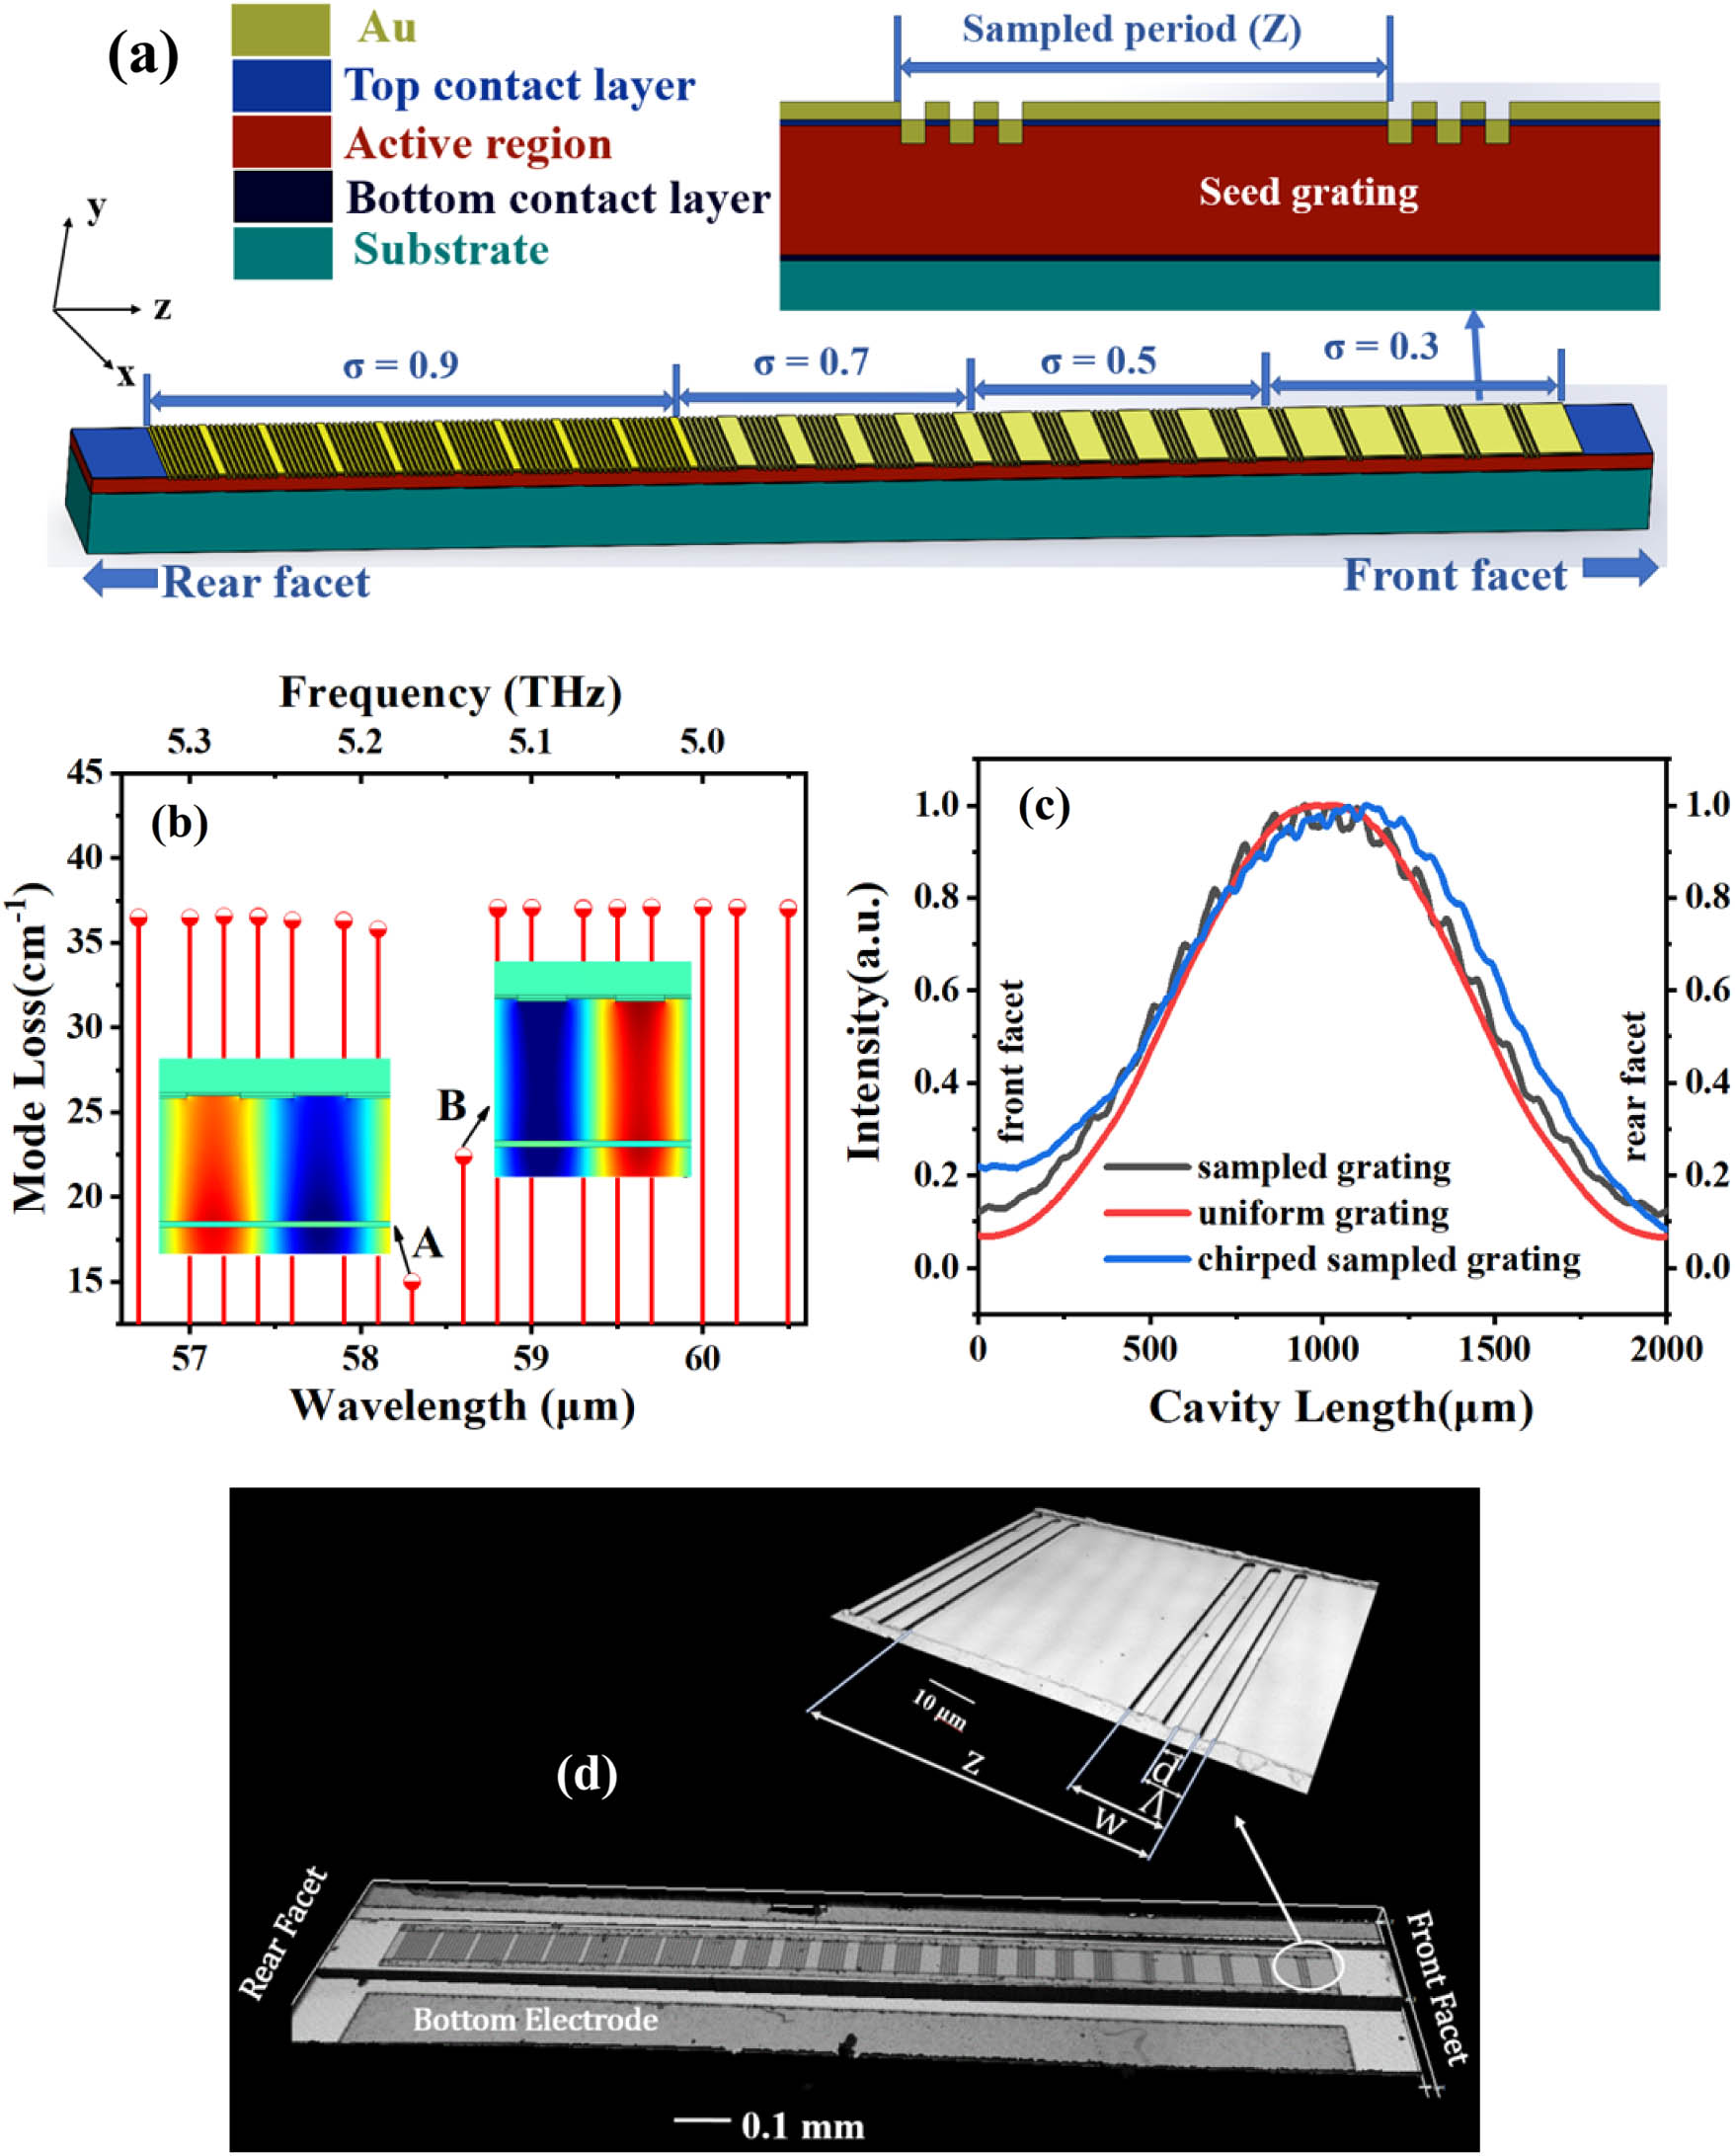 (a) Schematic diagram of the graded sampled grating DFB QCL. (b) Calculated mode loss versus wavelength for the QCL with graded sampled grating. (c) The envelope distribution of mode intensities (|Ey|2) inside lasers with three different grating structures. (d) The top view images of the DFB QCL structure and one-period sampled grating taken with a 3D stereomicroscope and one-period sampled grating.